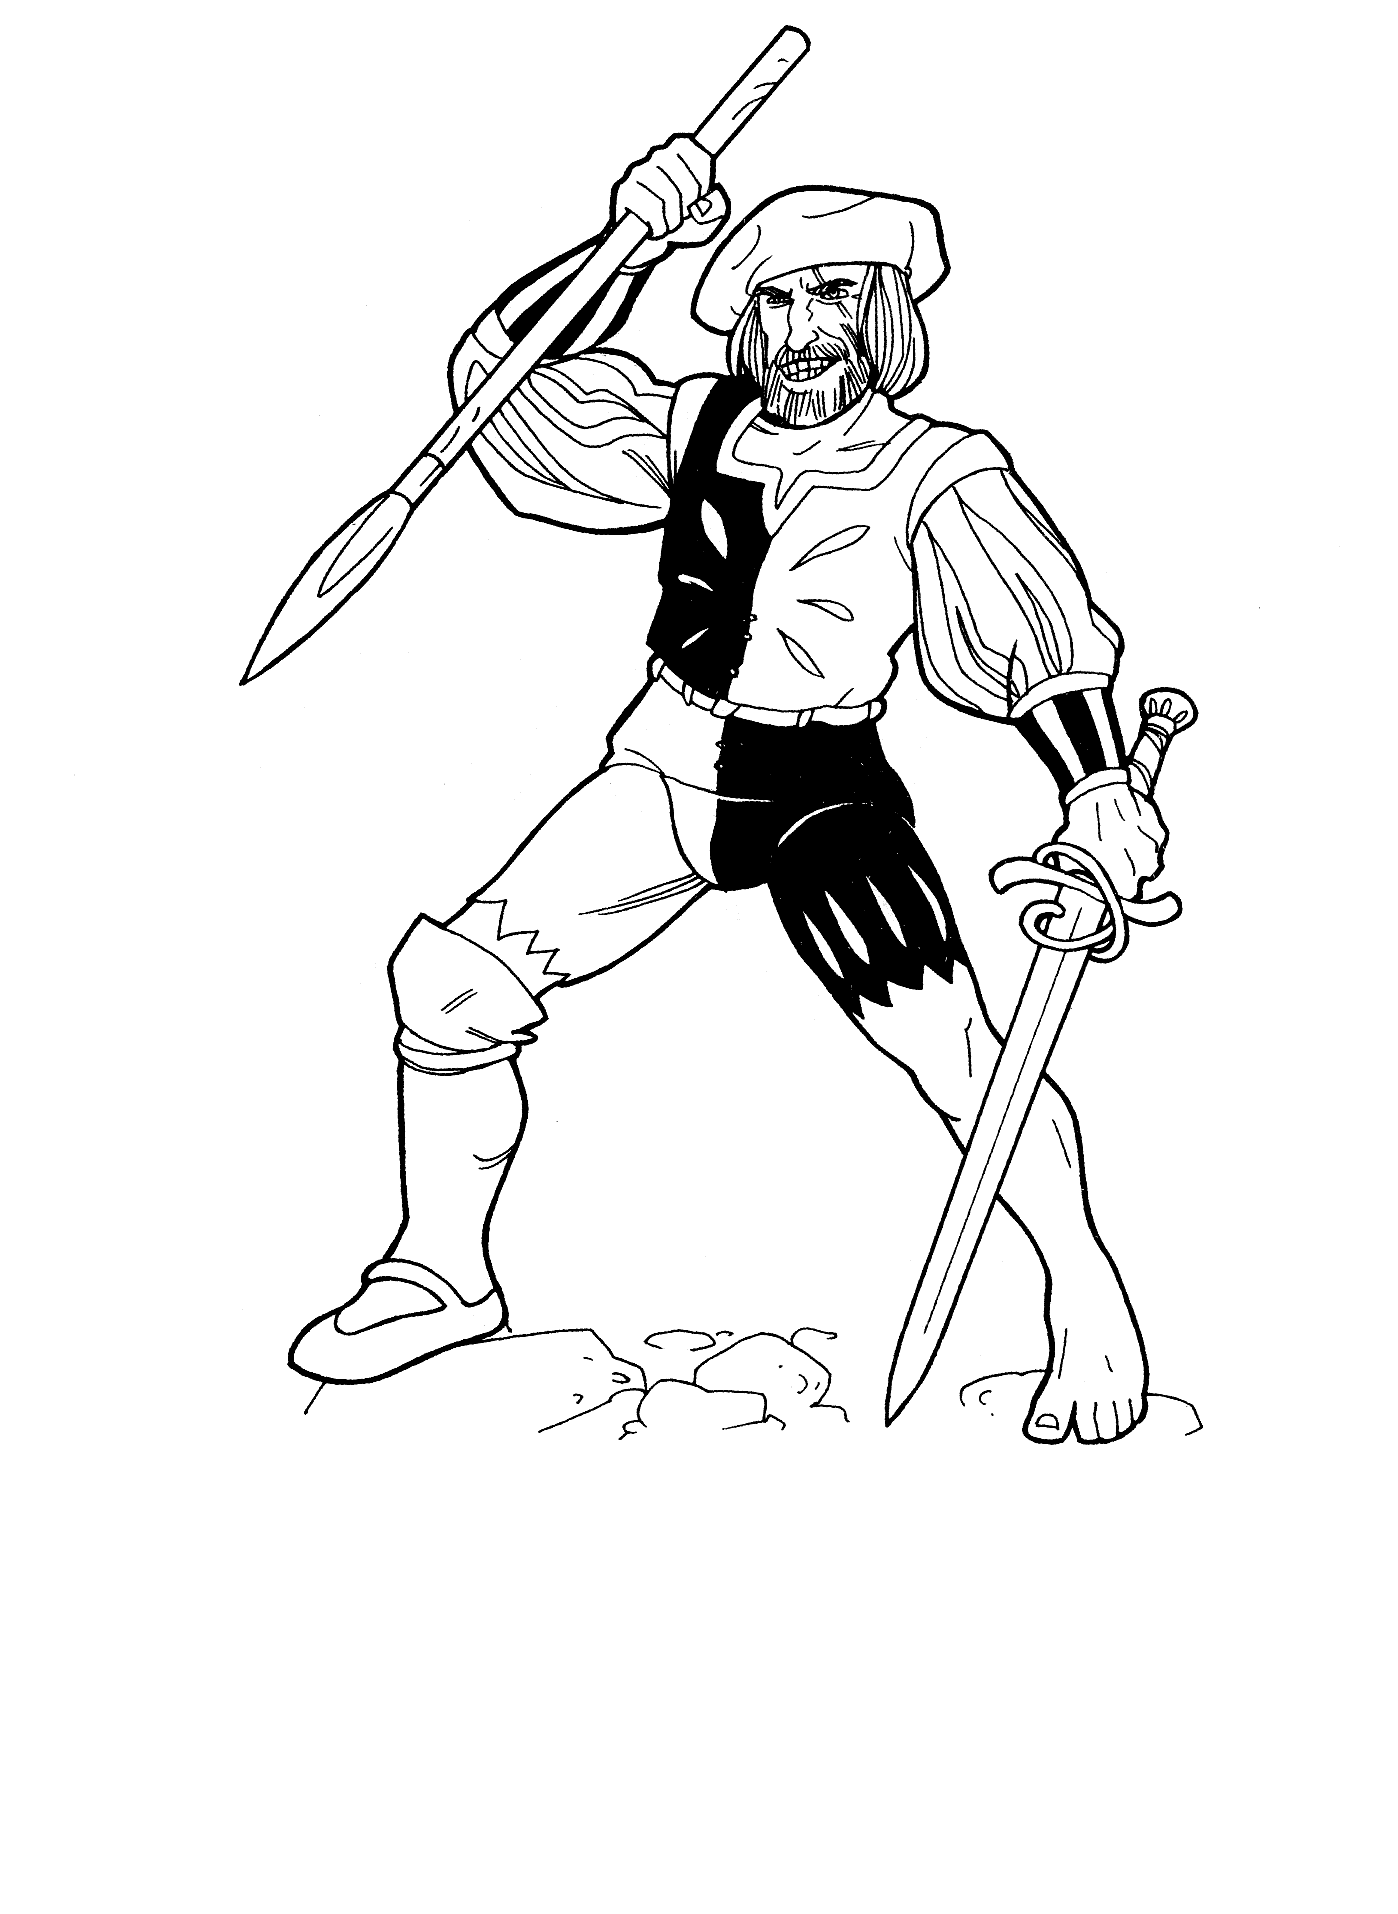 Soldiers and knights coloring Page / Soldiers and Knights